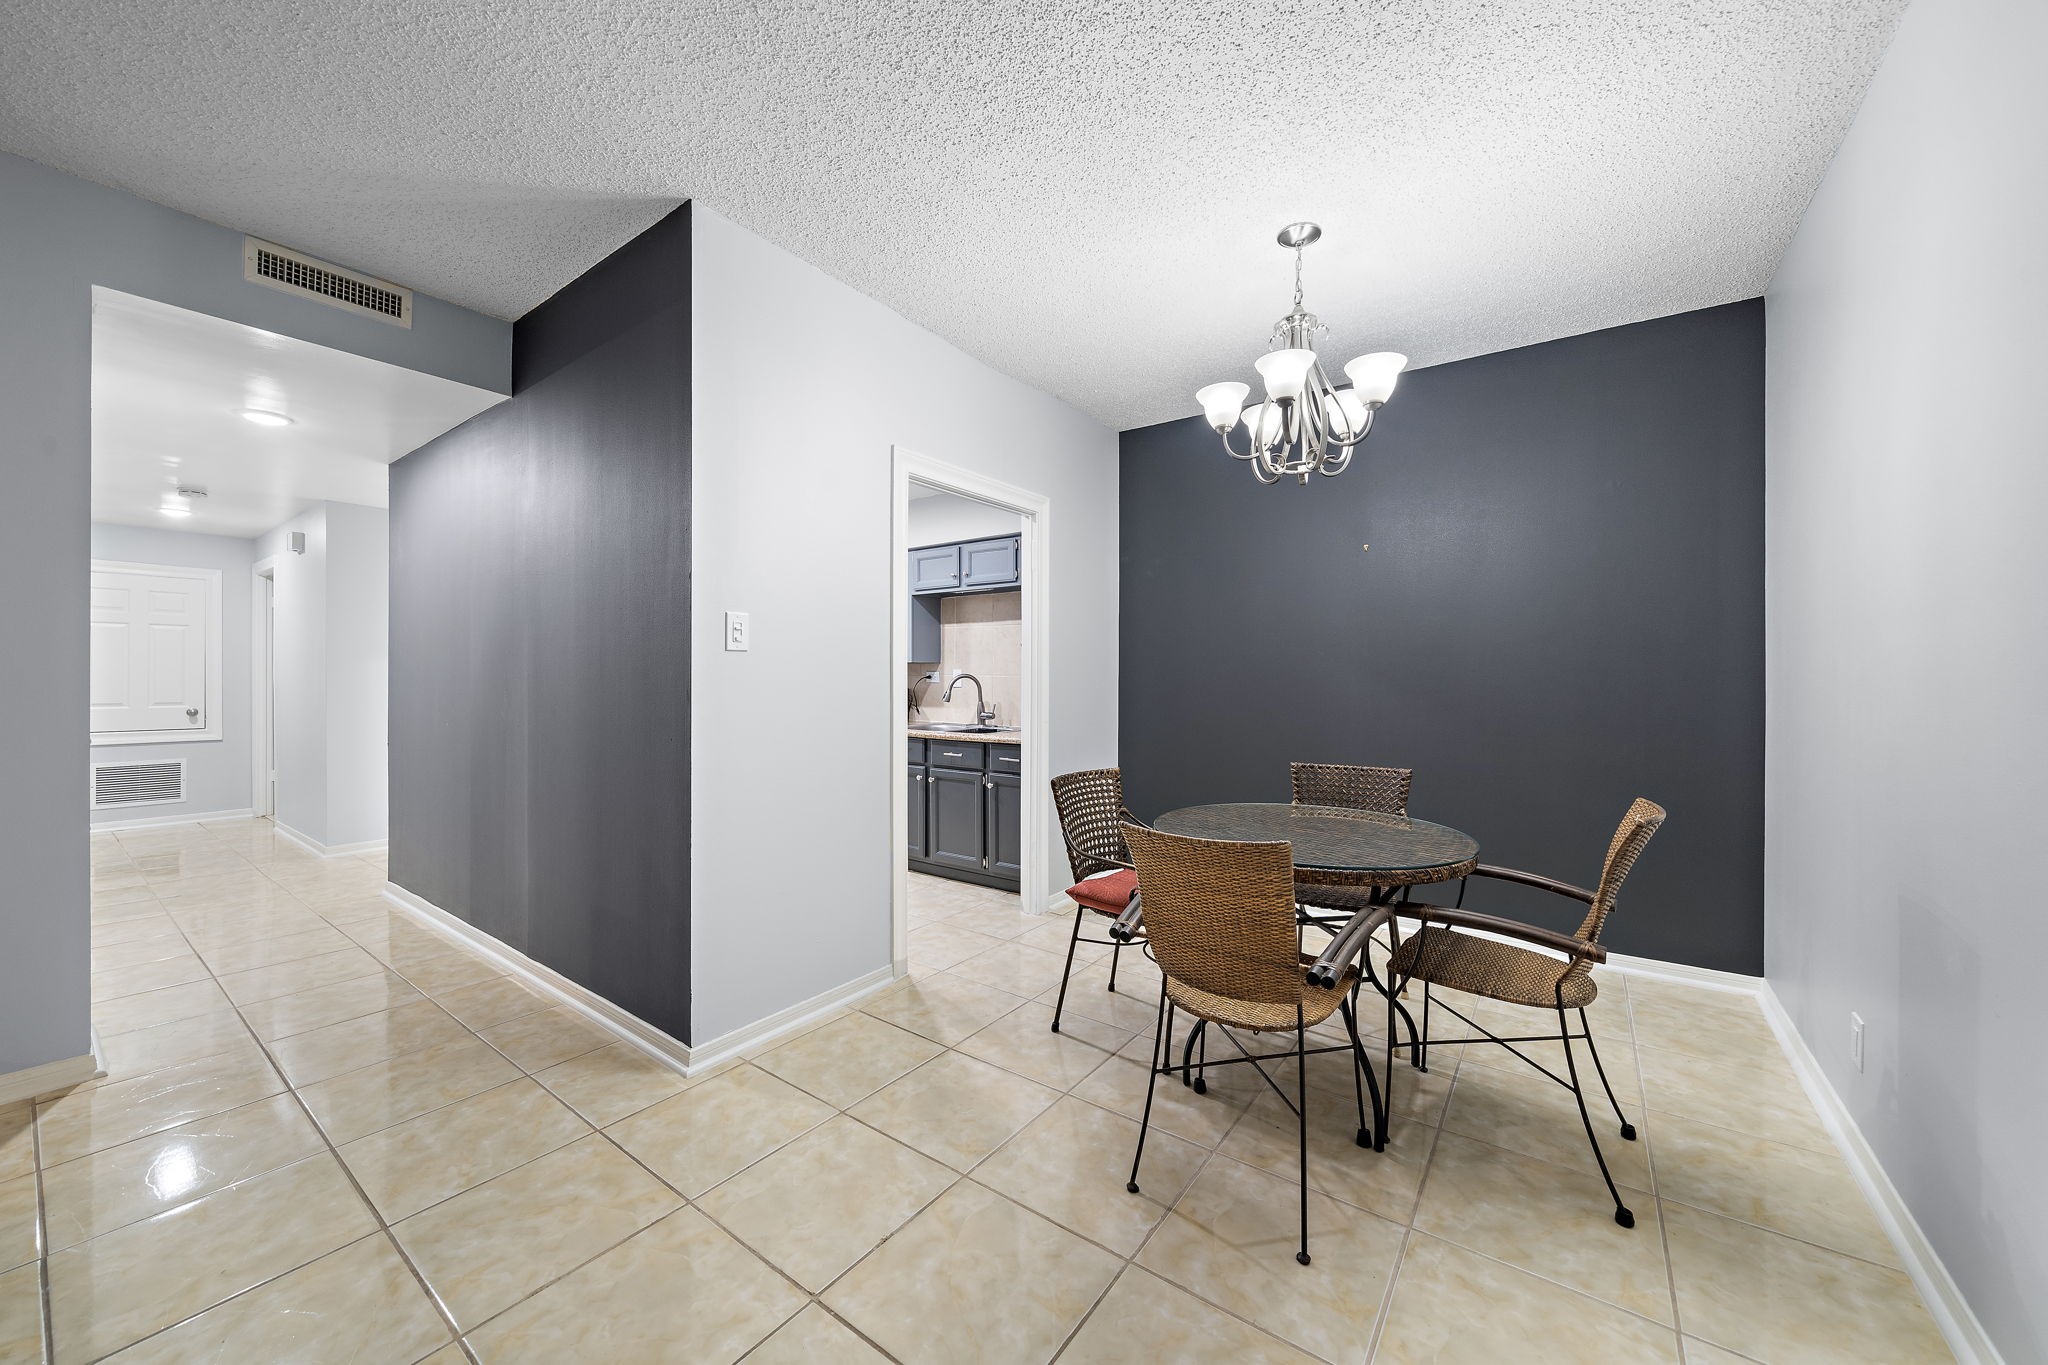 Dining area with a dark accent wall, tiled floor, and an opening to the kitchen.